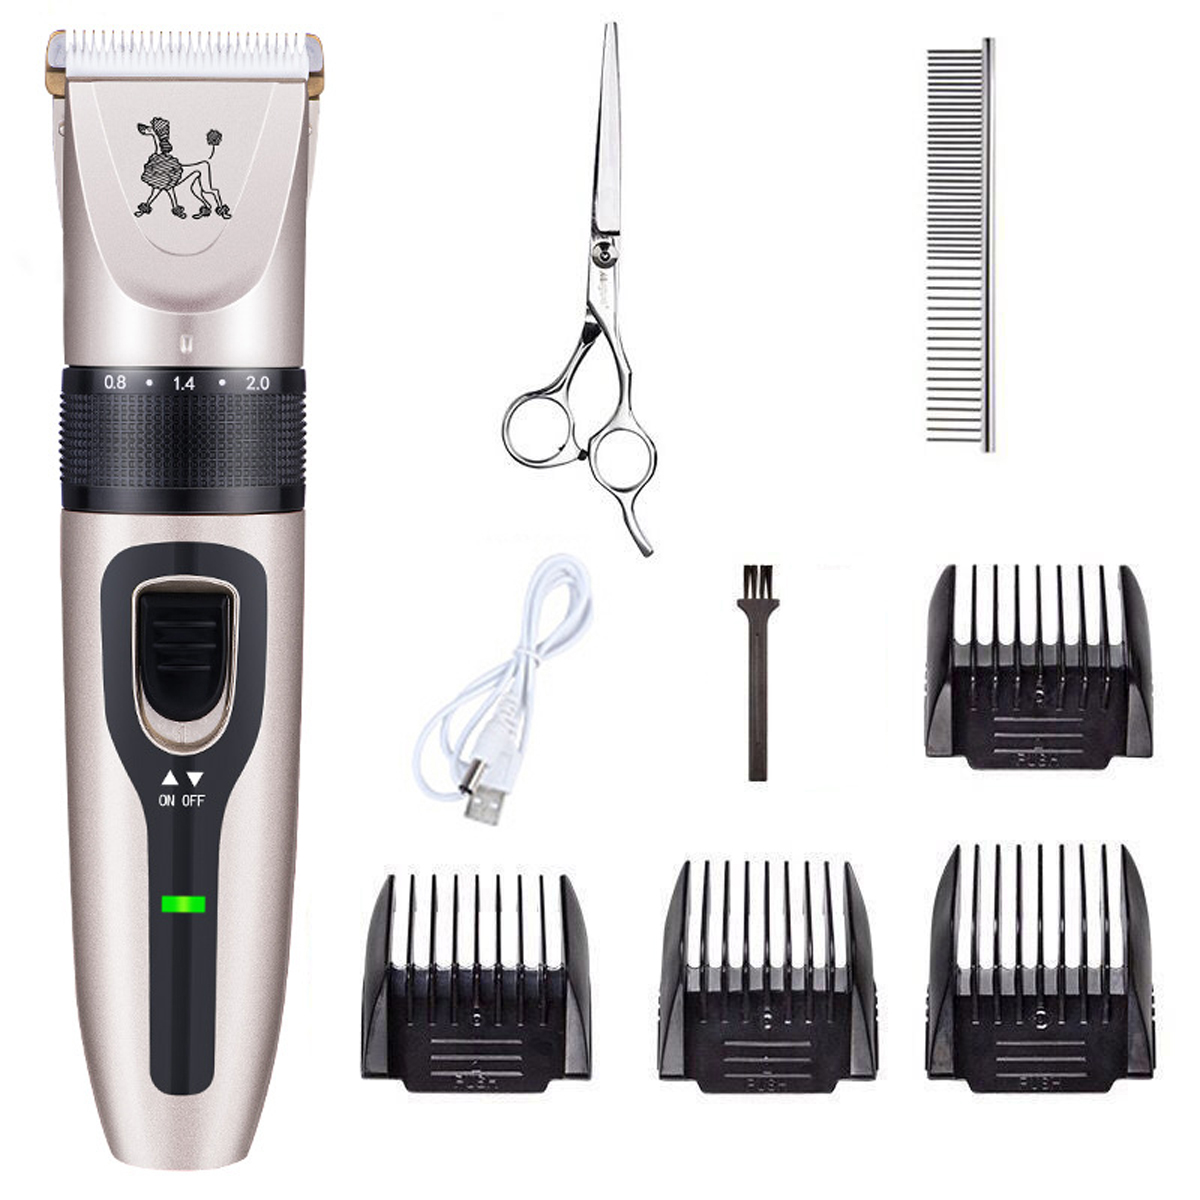 Dog Clippers Washable,2020 New Upgrade Dog Grooming Kit Waterproof Professional Pet Grooming Kit Electric Dog Trimmers Clippers Cordless，USB Rechargeable Low Noise Pet Shaver for Dogs Rabbits Cats 